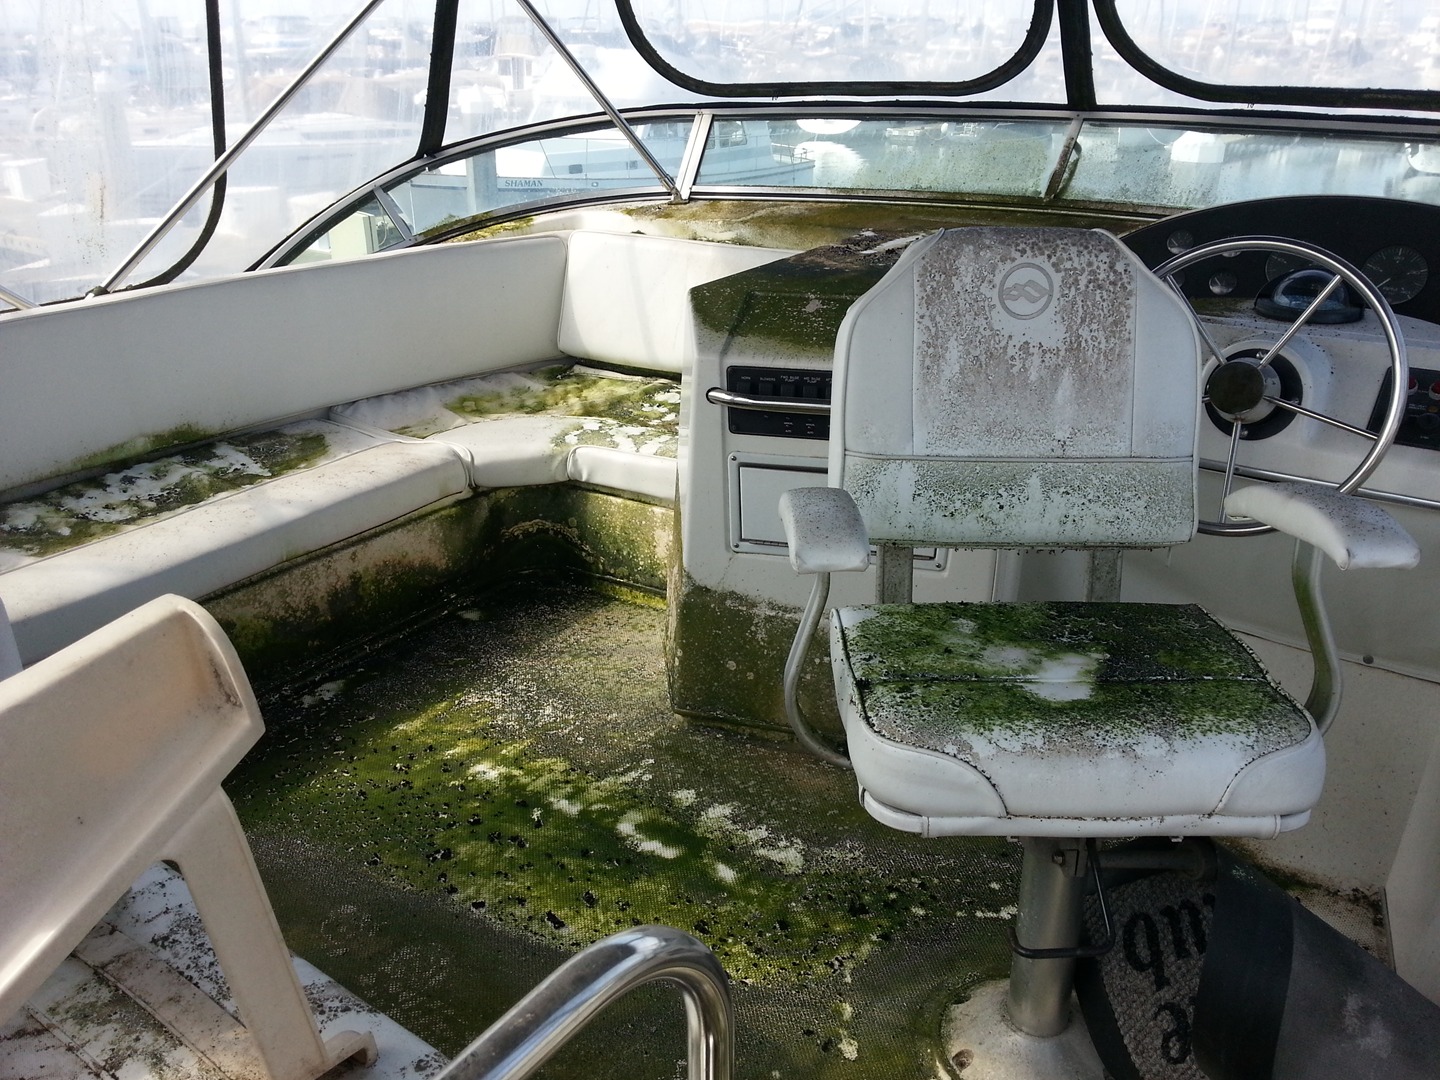 Boat Stuff Marine Services - Boat Repair, Detailing, Buffing and